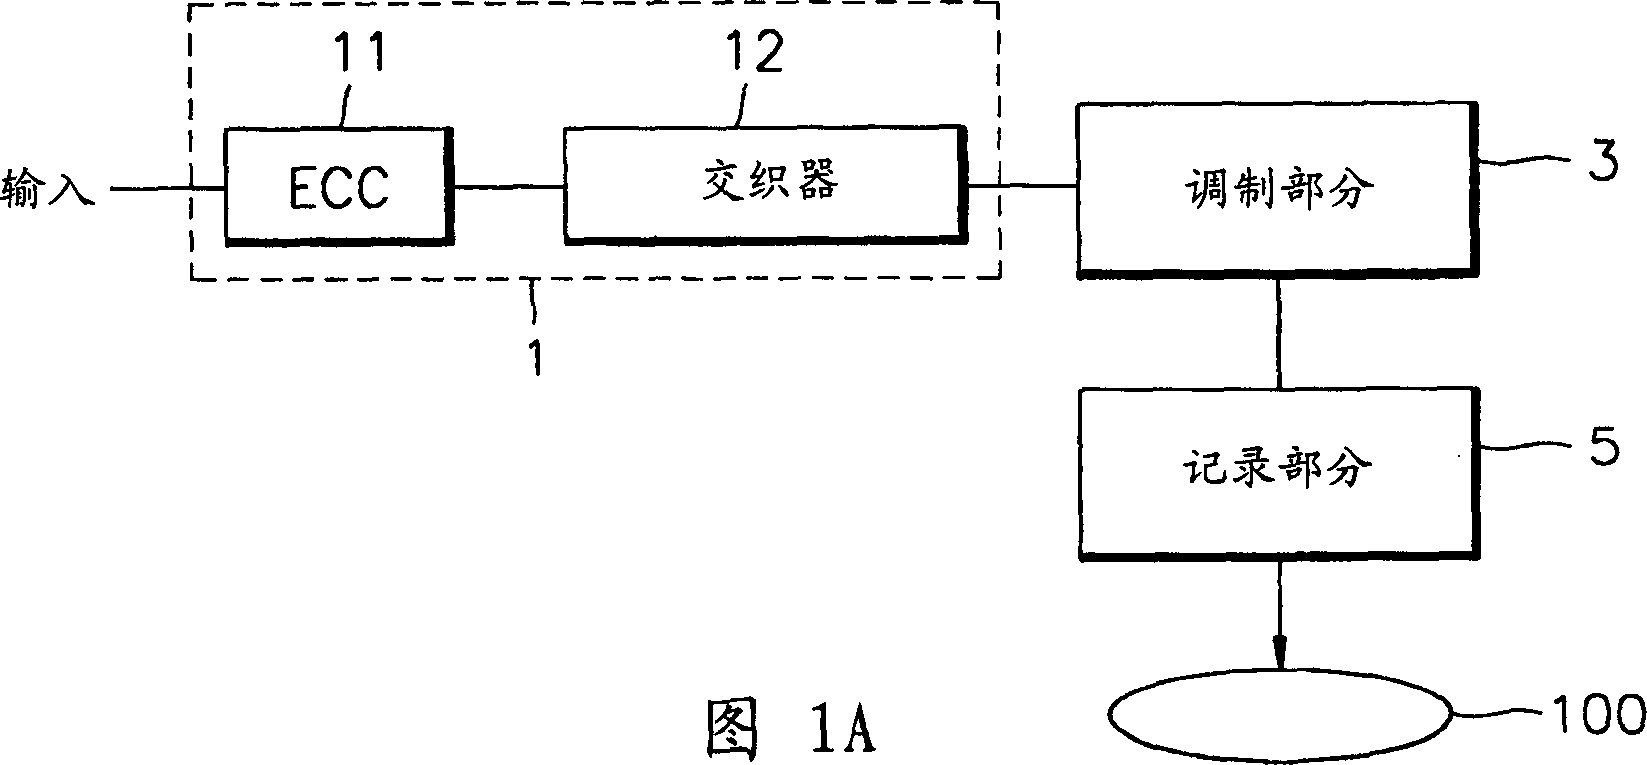 Optical recording medium, data recording device and data recording method used by such device